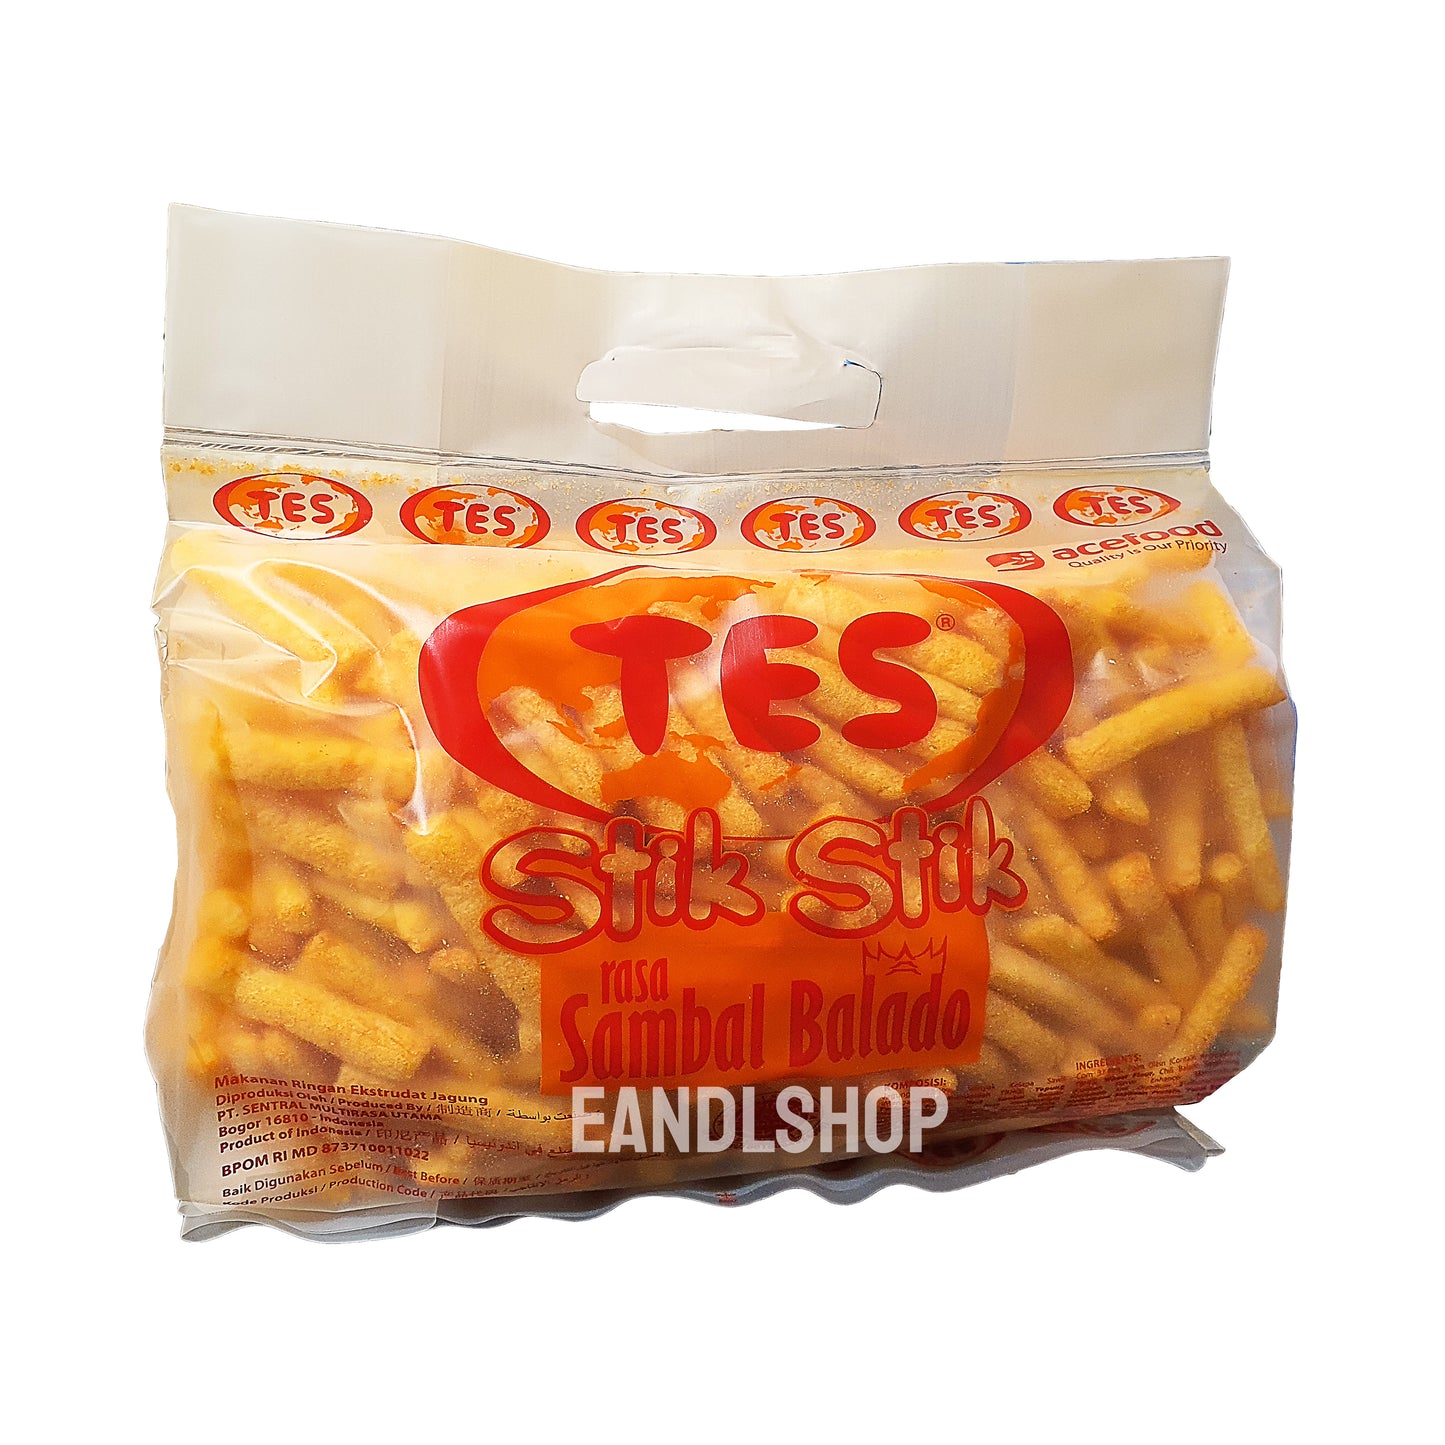 TES sambal balado stick 500g. Old-school biscuits, modern snacks (chips, crackers), cakes, gummies, plums, dried fruits, nuts, herbal tea – available at www.EANDLSHOP.com